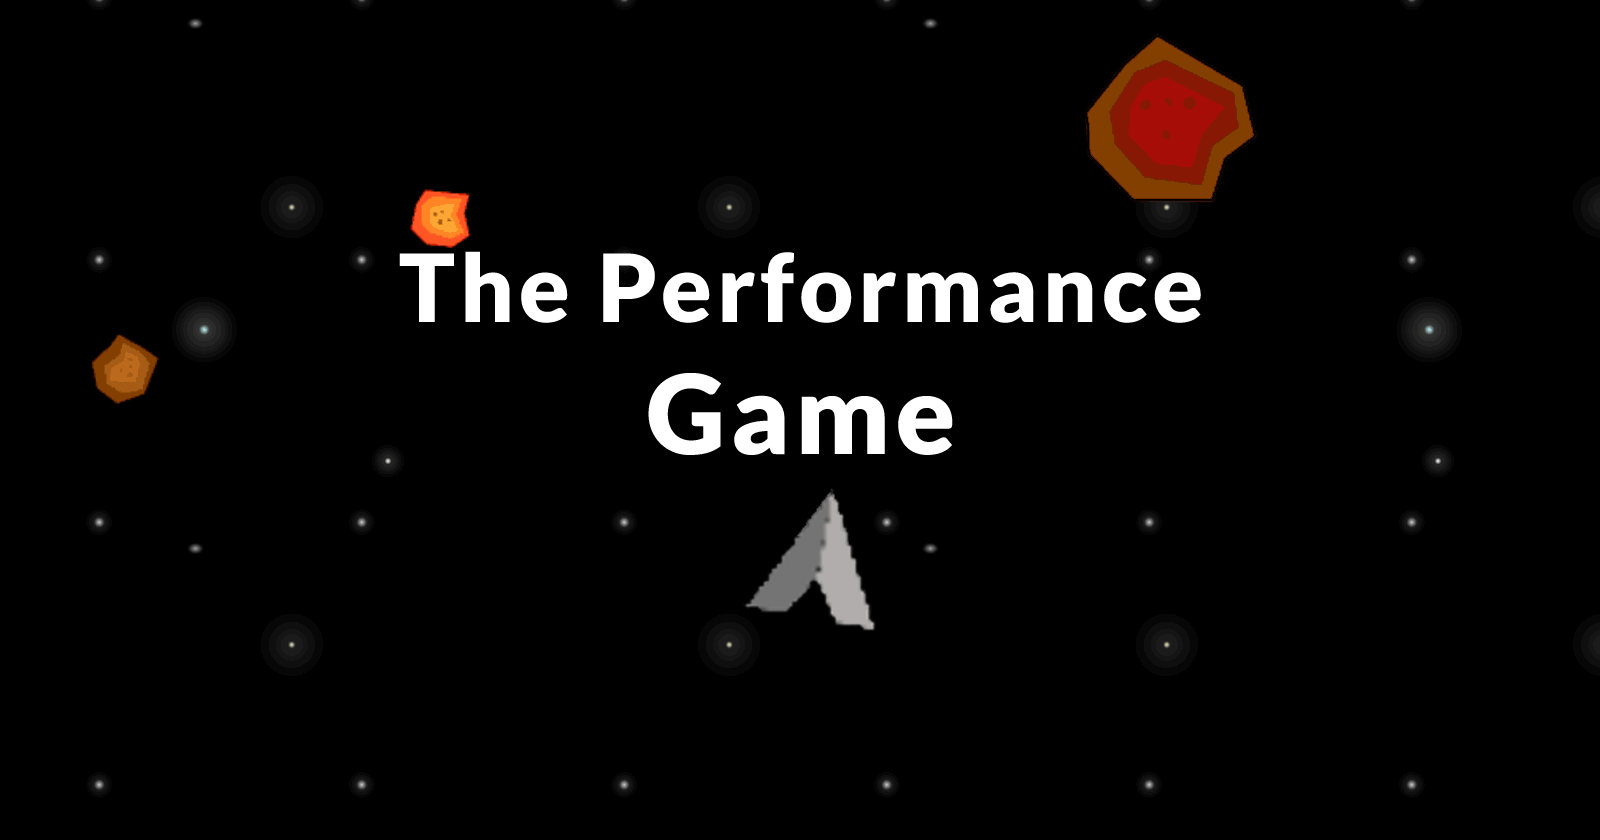 Screenshot of Google's Performance Game with the words The Performance Game superimposed